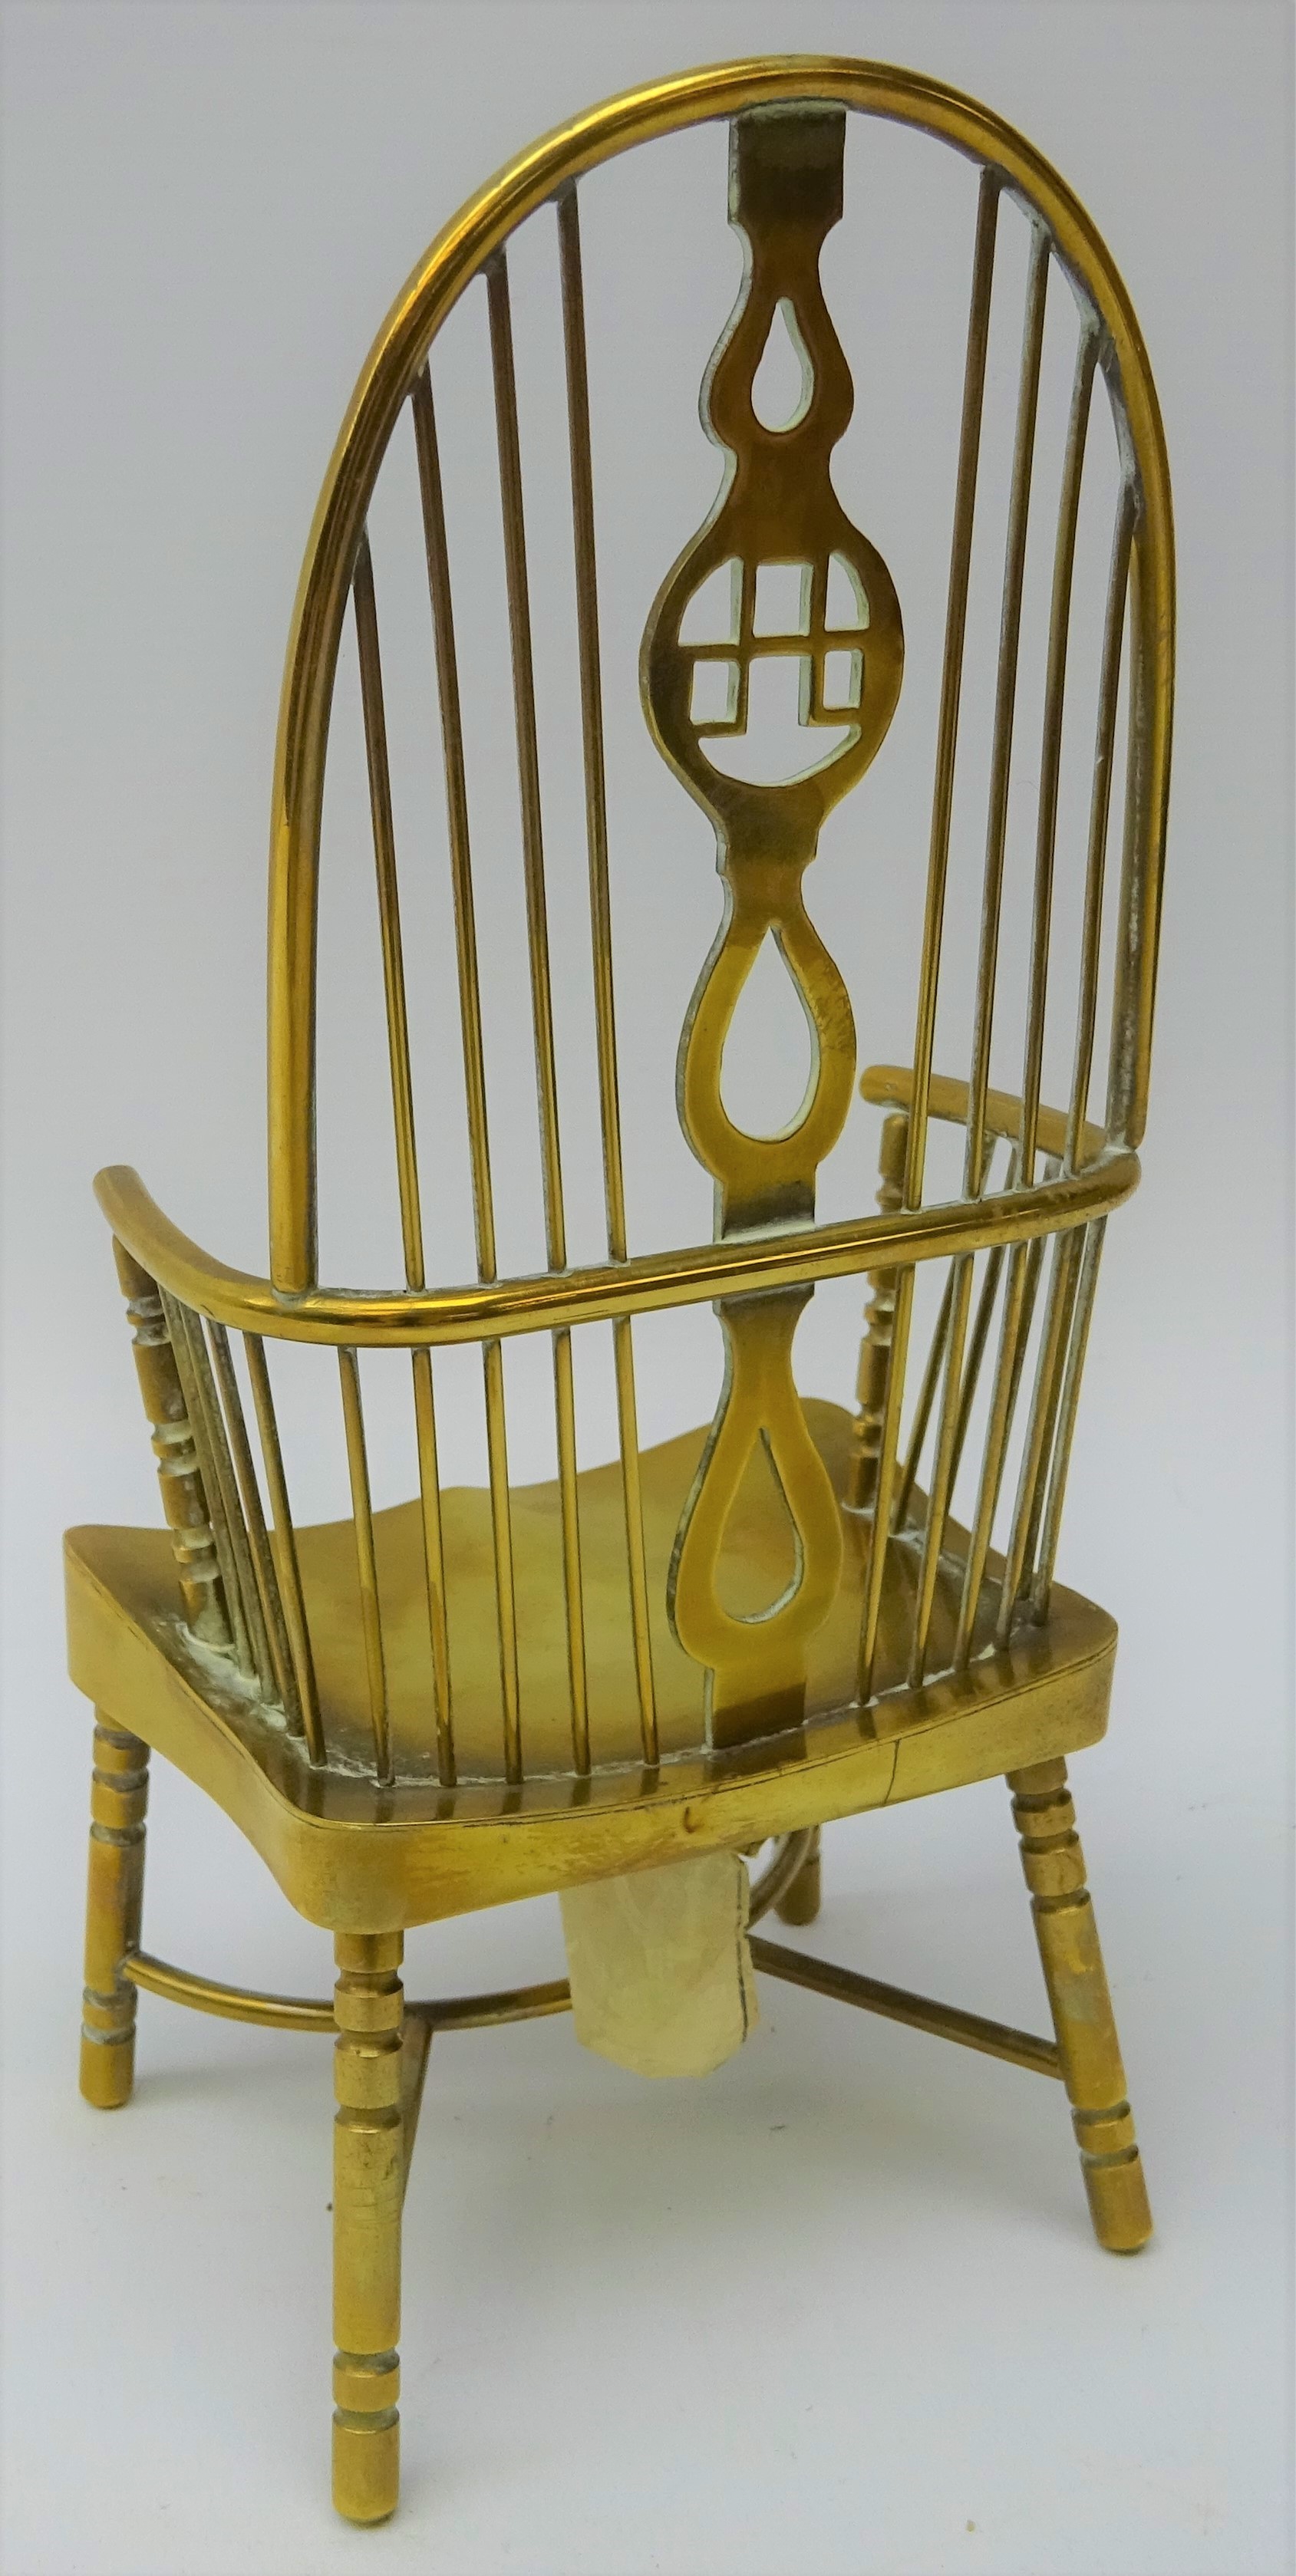 Miniature brass double bow Windsor chair with saddle seat and crinoline stretcher, - Image 2 of 2